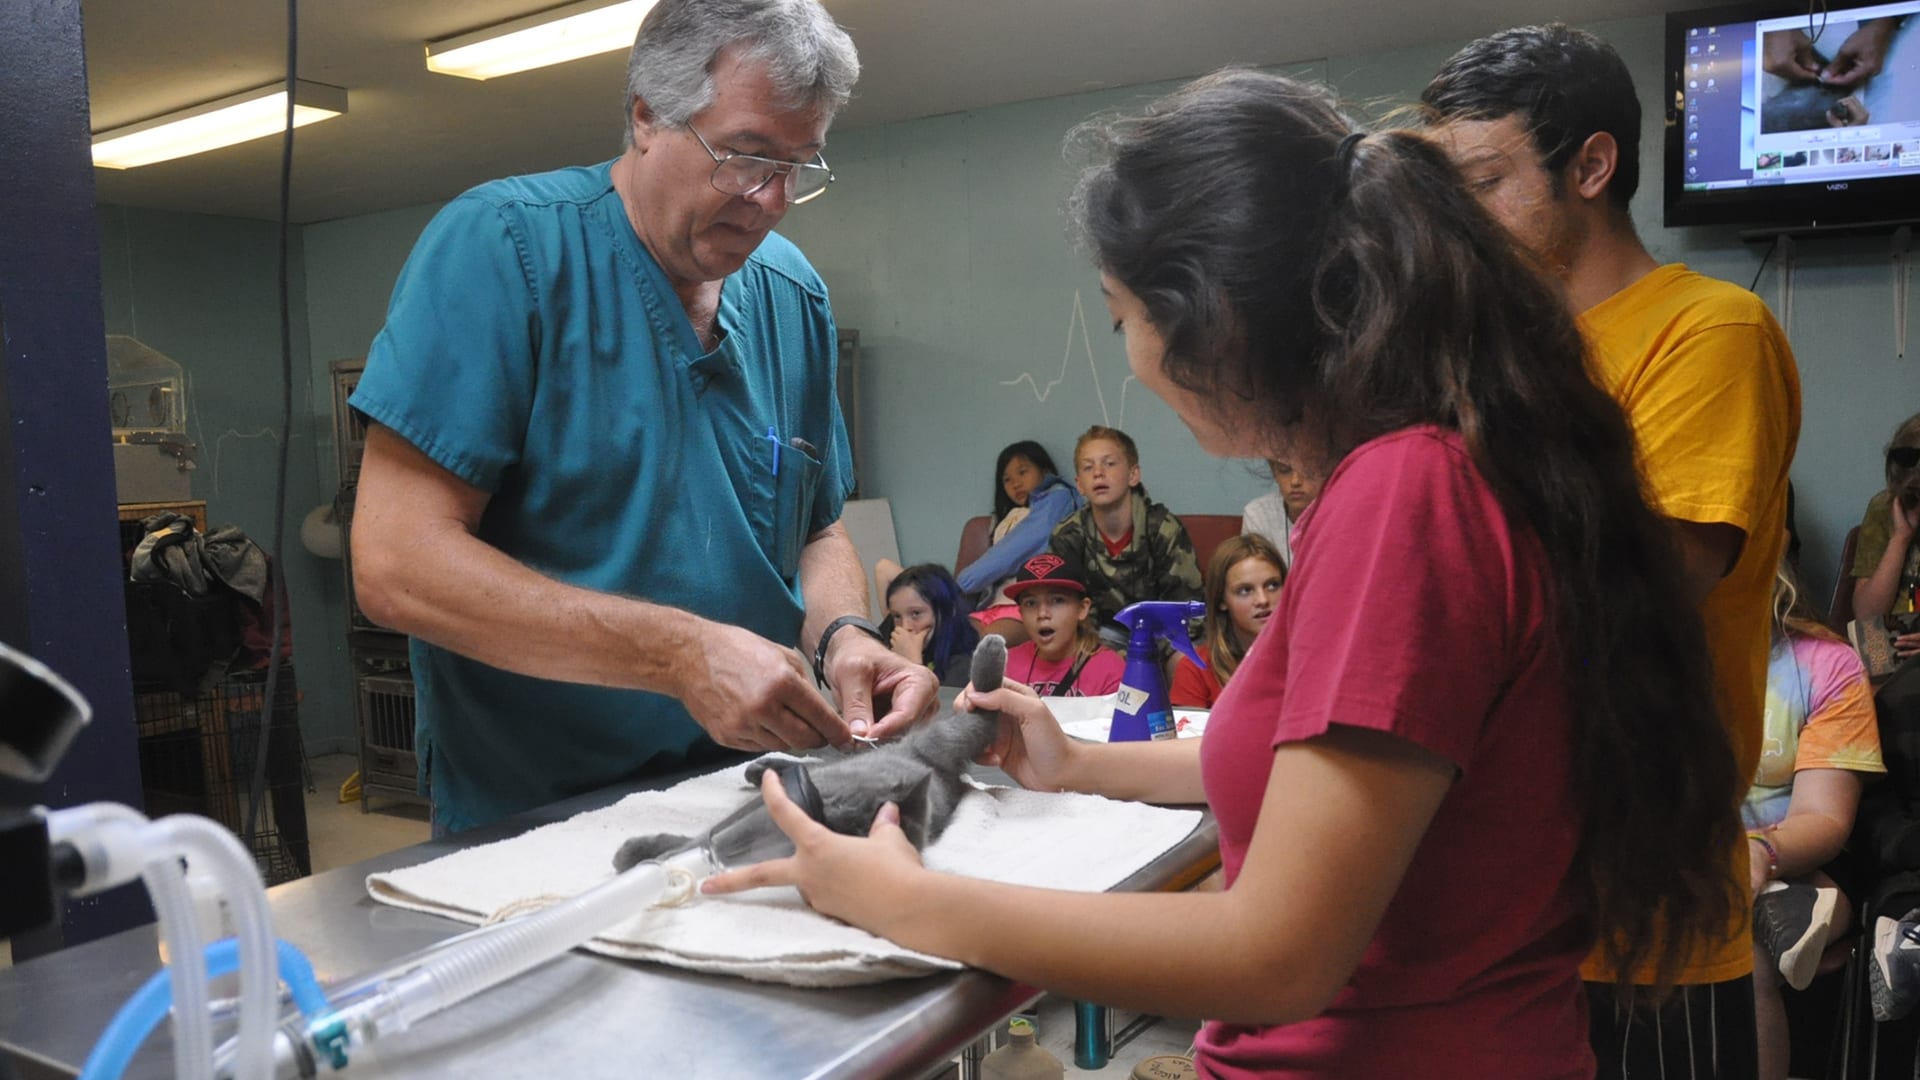 Home Page Image Carousel - Vet Camp - Dr. Janke Veterinarian performing surgery - Cub Creek Science and Animal Camp